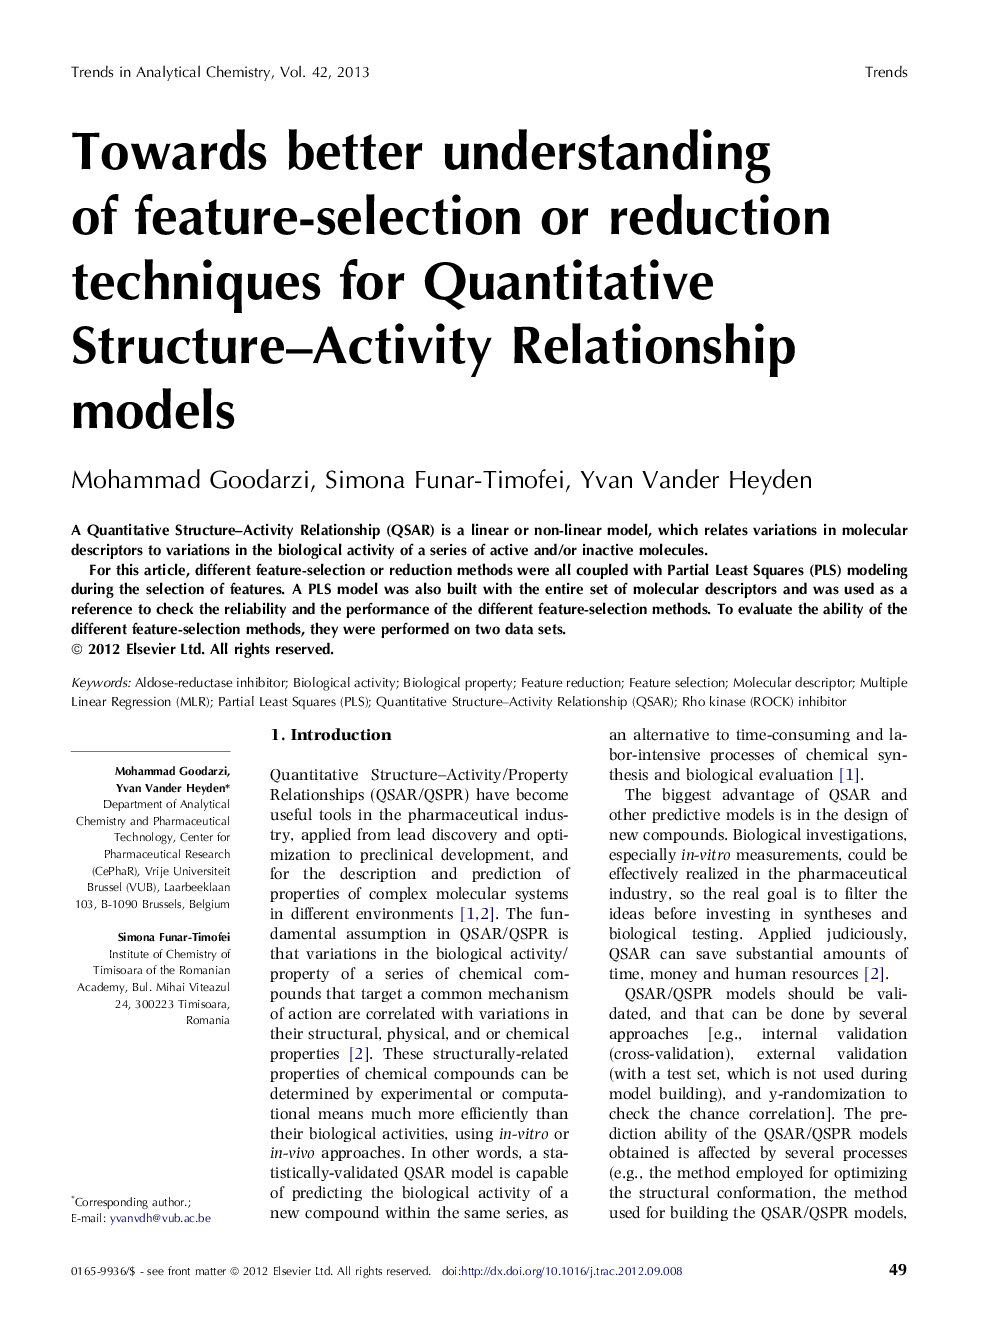 Towards better understanding of feature-selection or reduction techniques for Quantitative Structure–Activity Relationship models